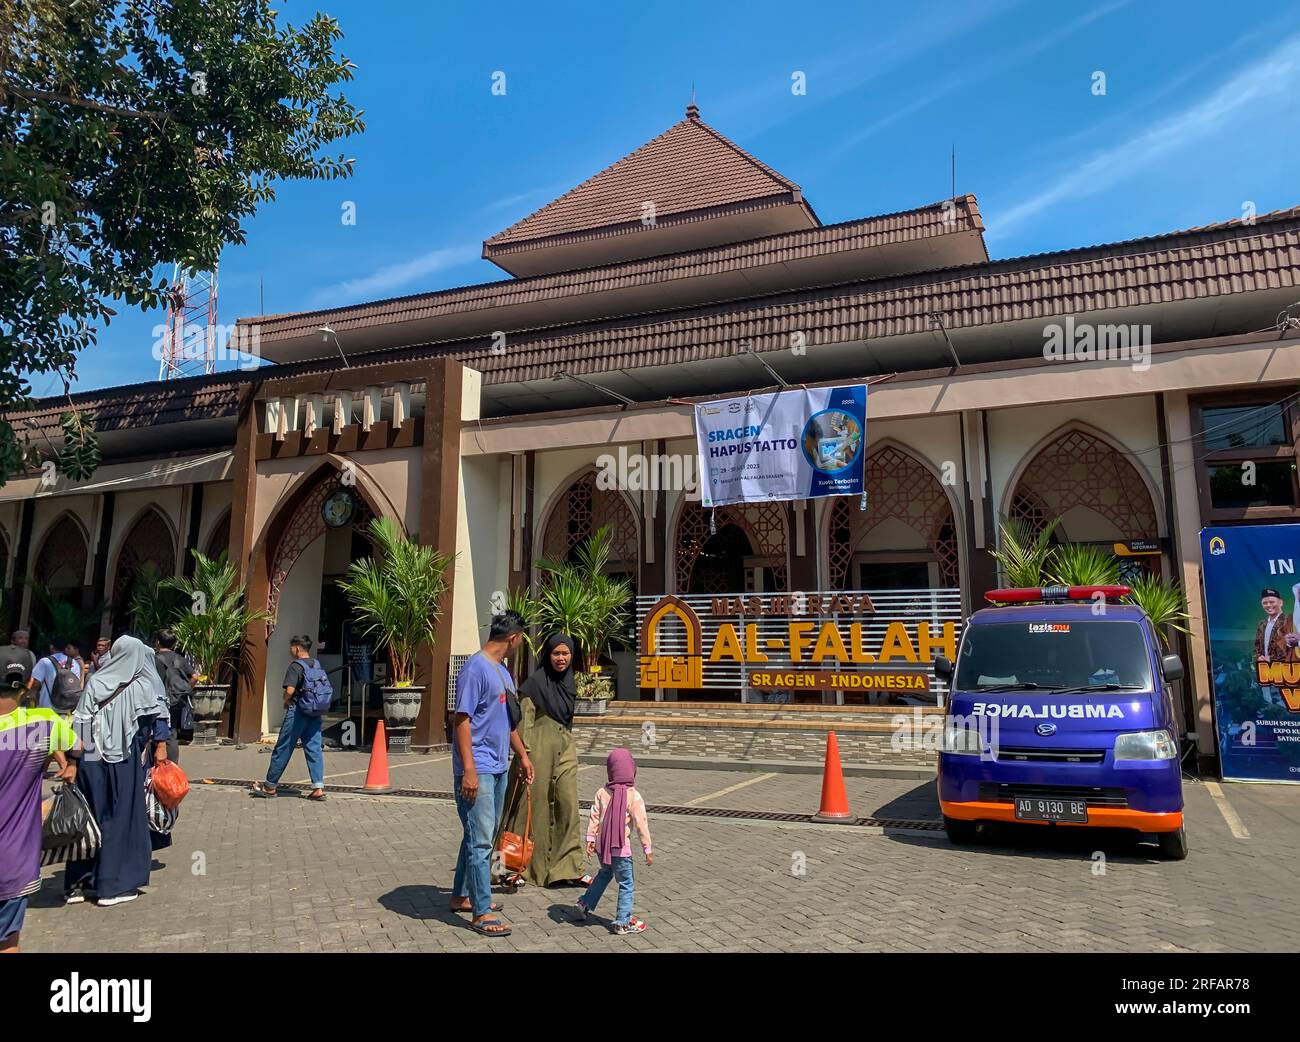 Sragen, Indonesia - July 30, 2023: Masjid Raya Al-Falah Sragen, a modern and professionally managed mosque in Sragen City, Central Java, Indonesia Stock Photo